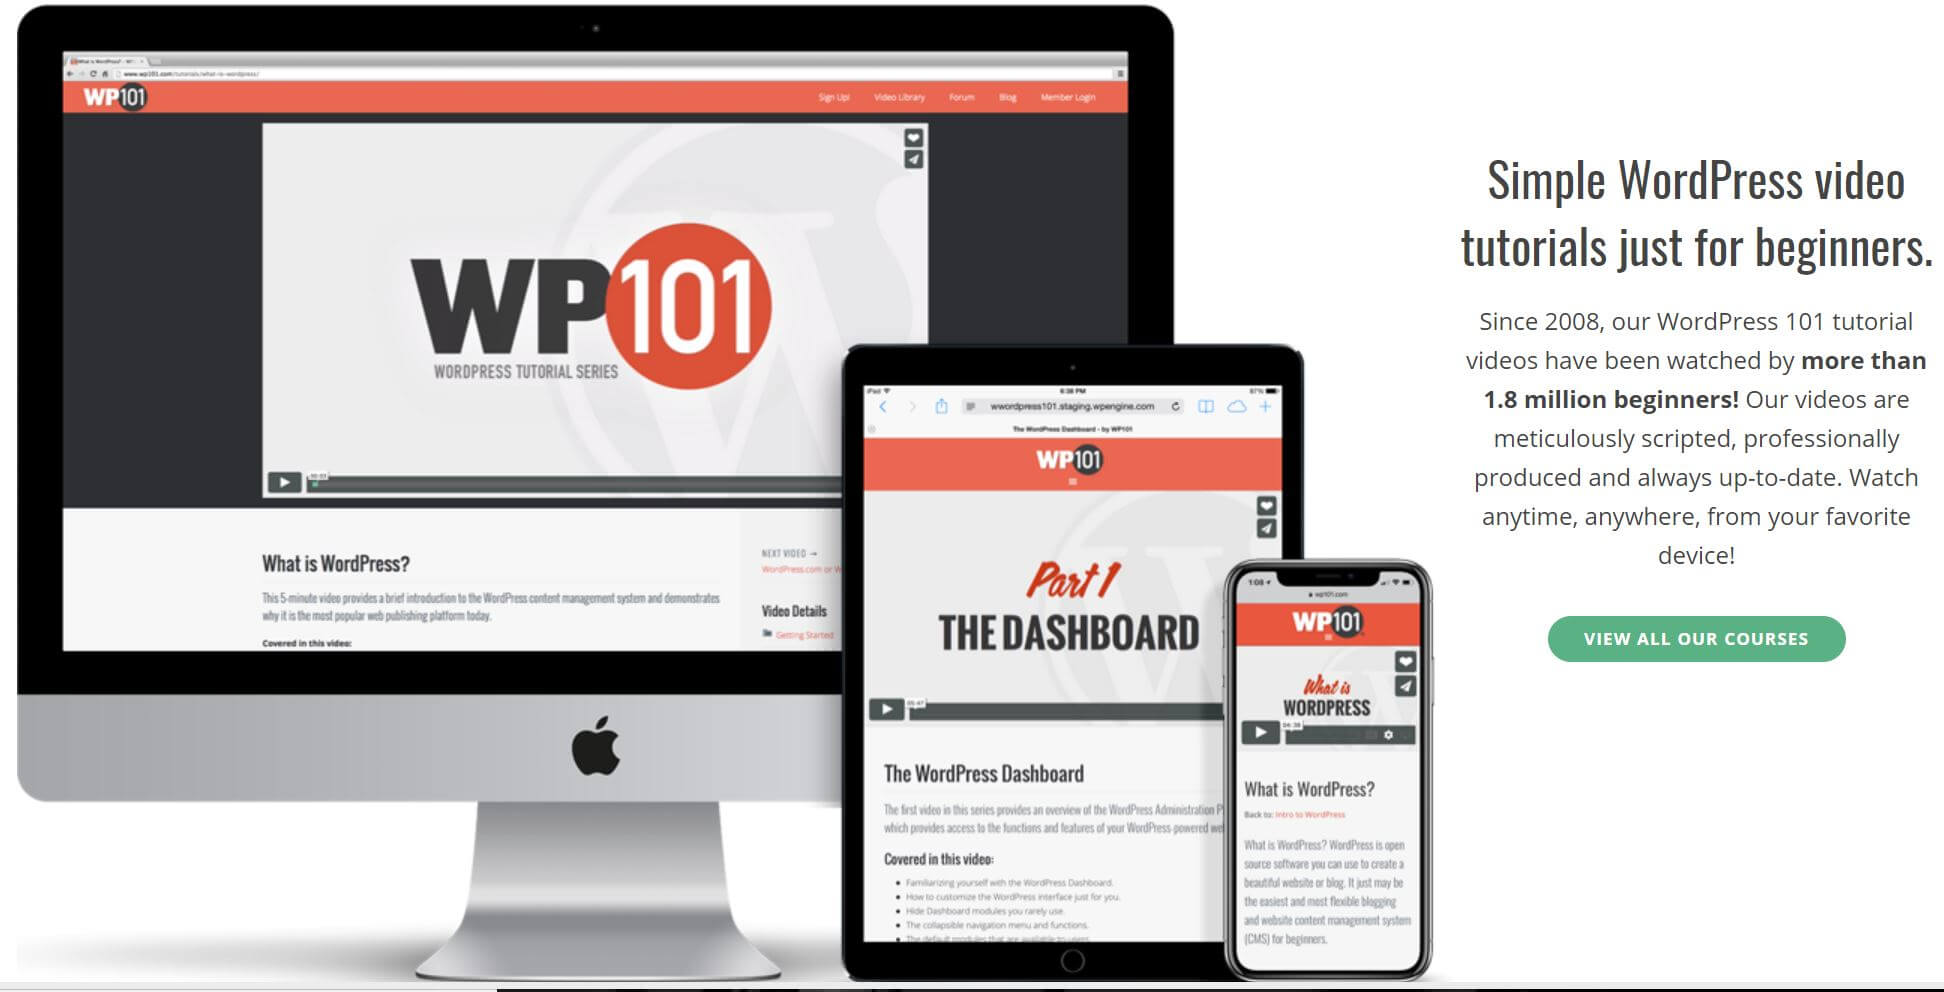 The WP101 WordPress course welcoming screen displayed on desktop and mobile devices. 